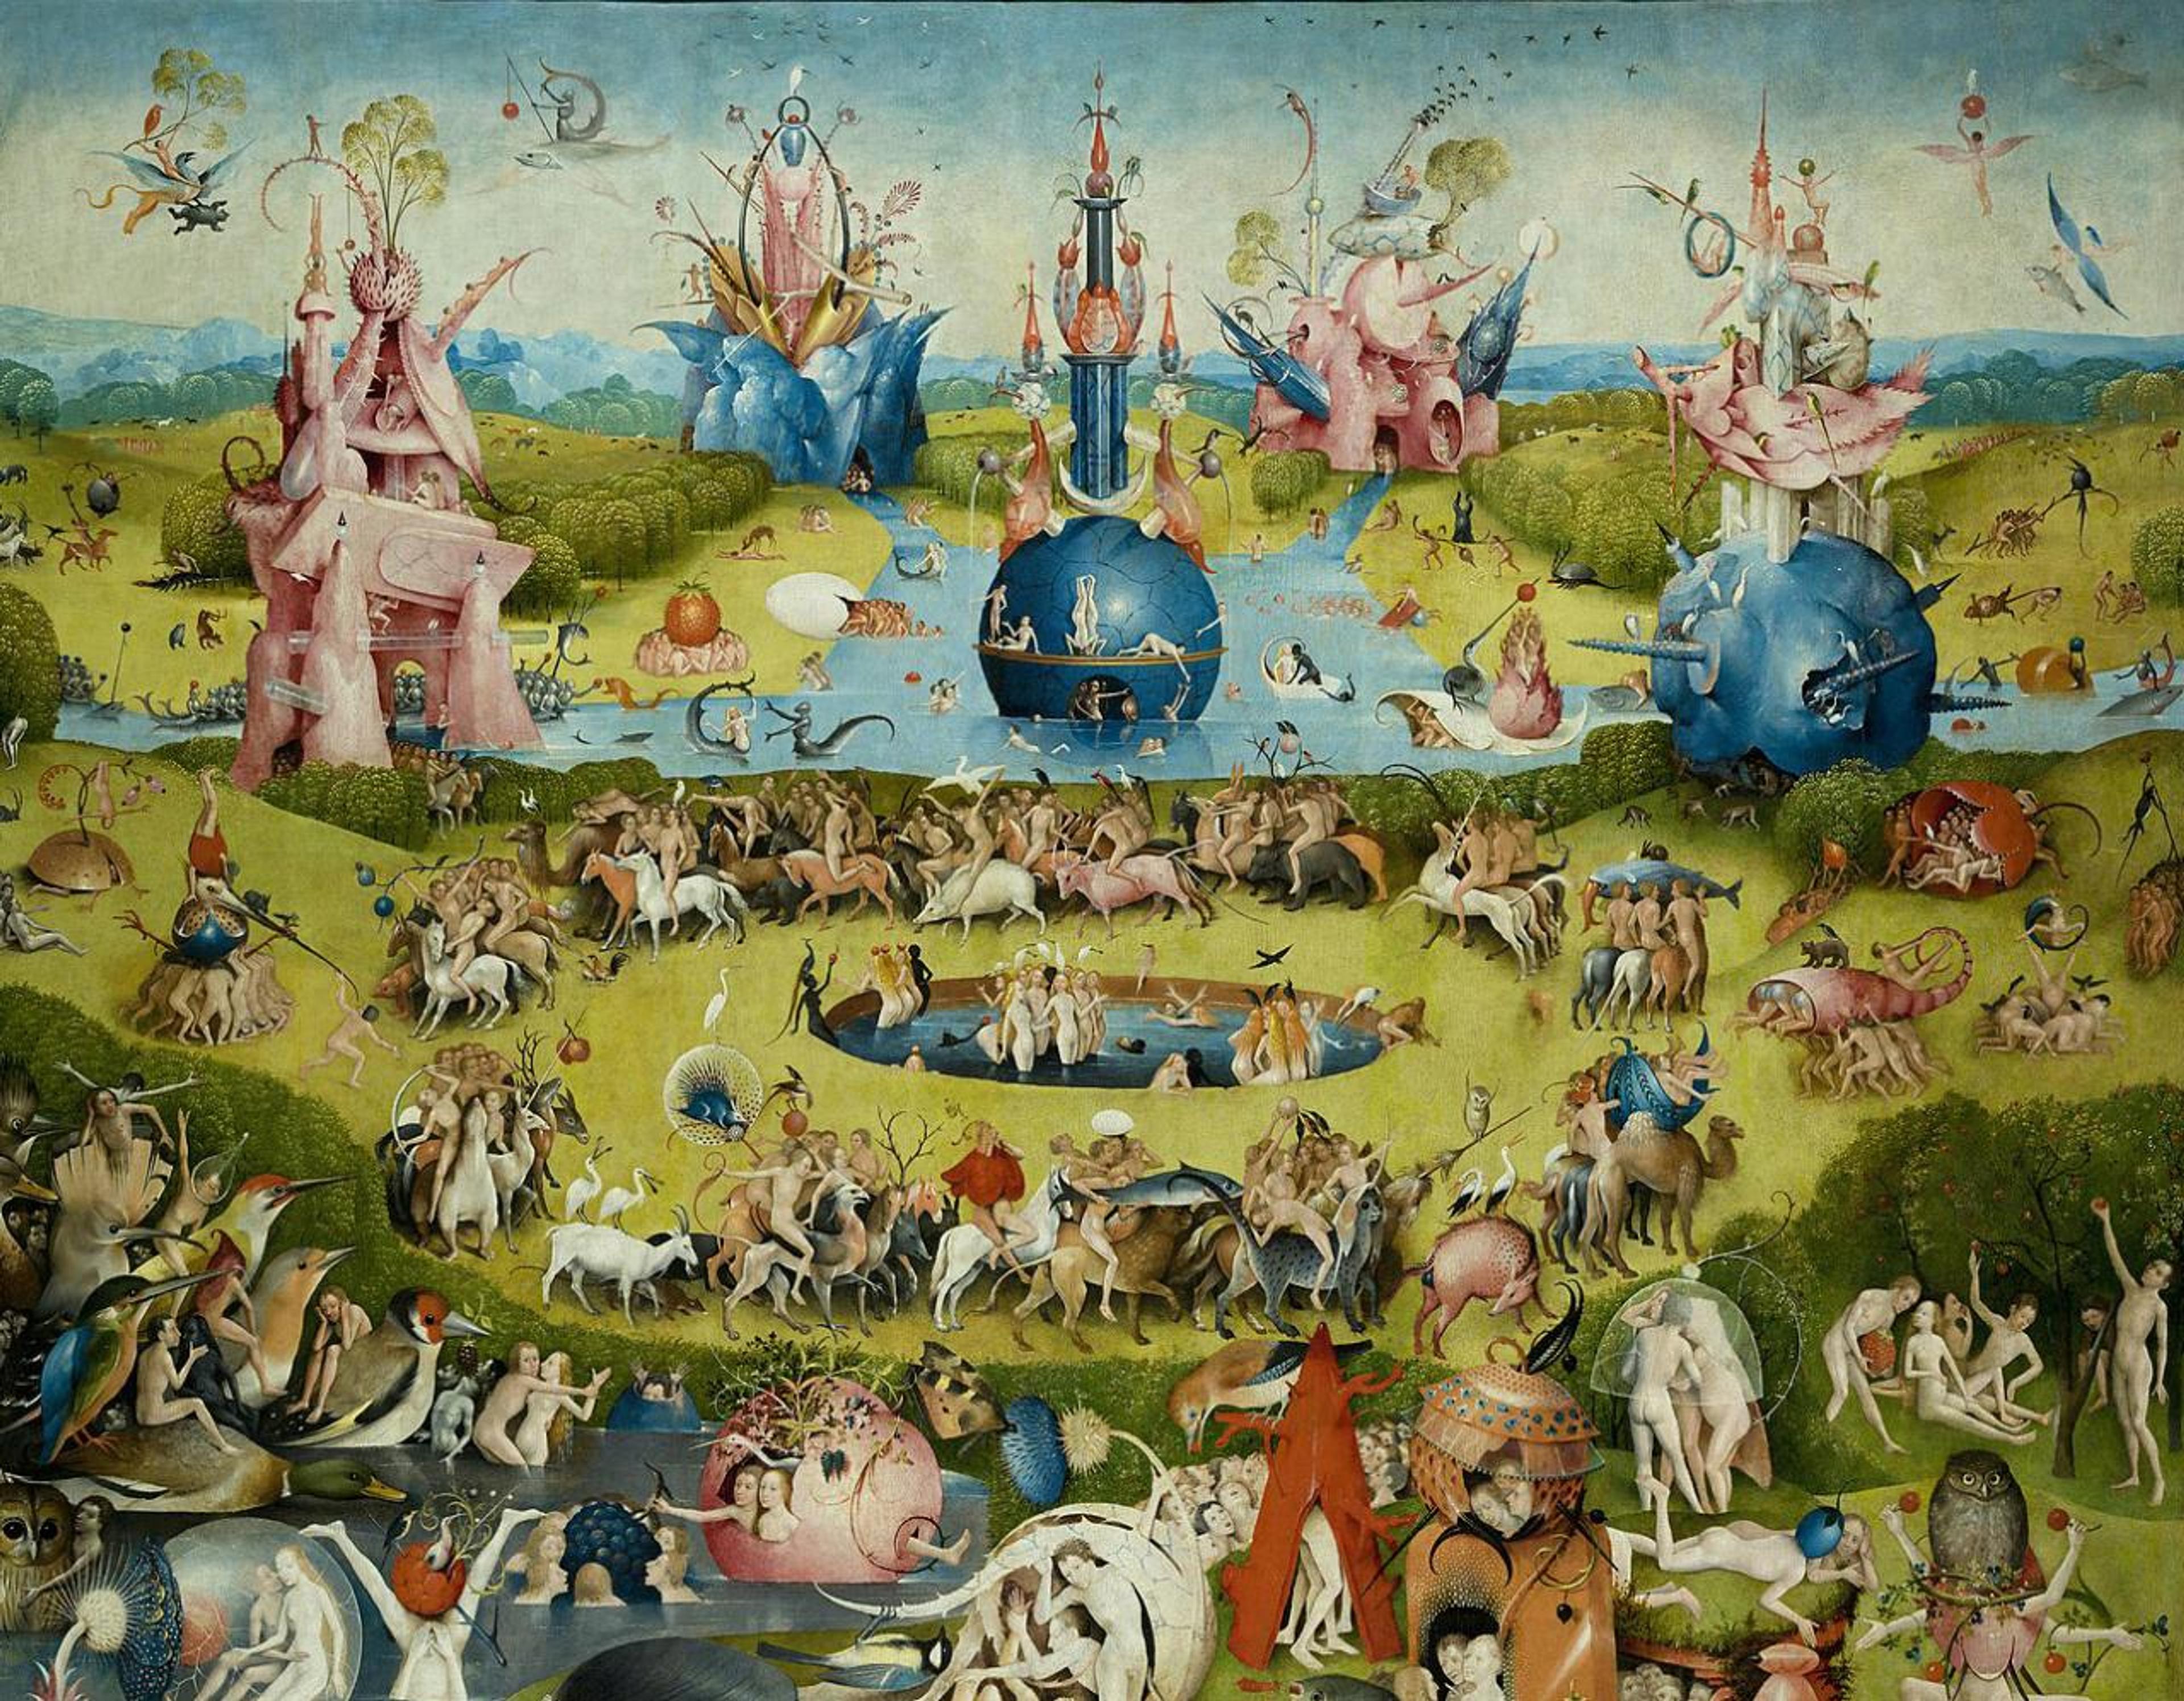 Detail from the central panel of Hieronymus Bosch's The Garden of Earthly Delights, ca. 1490–1500